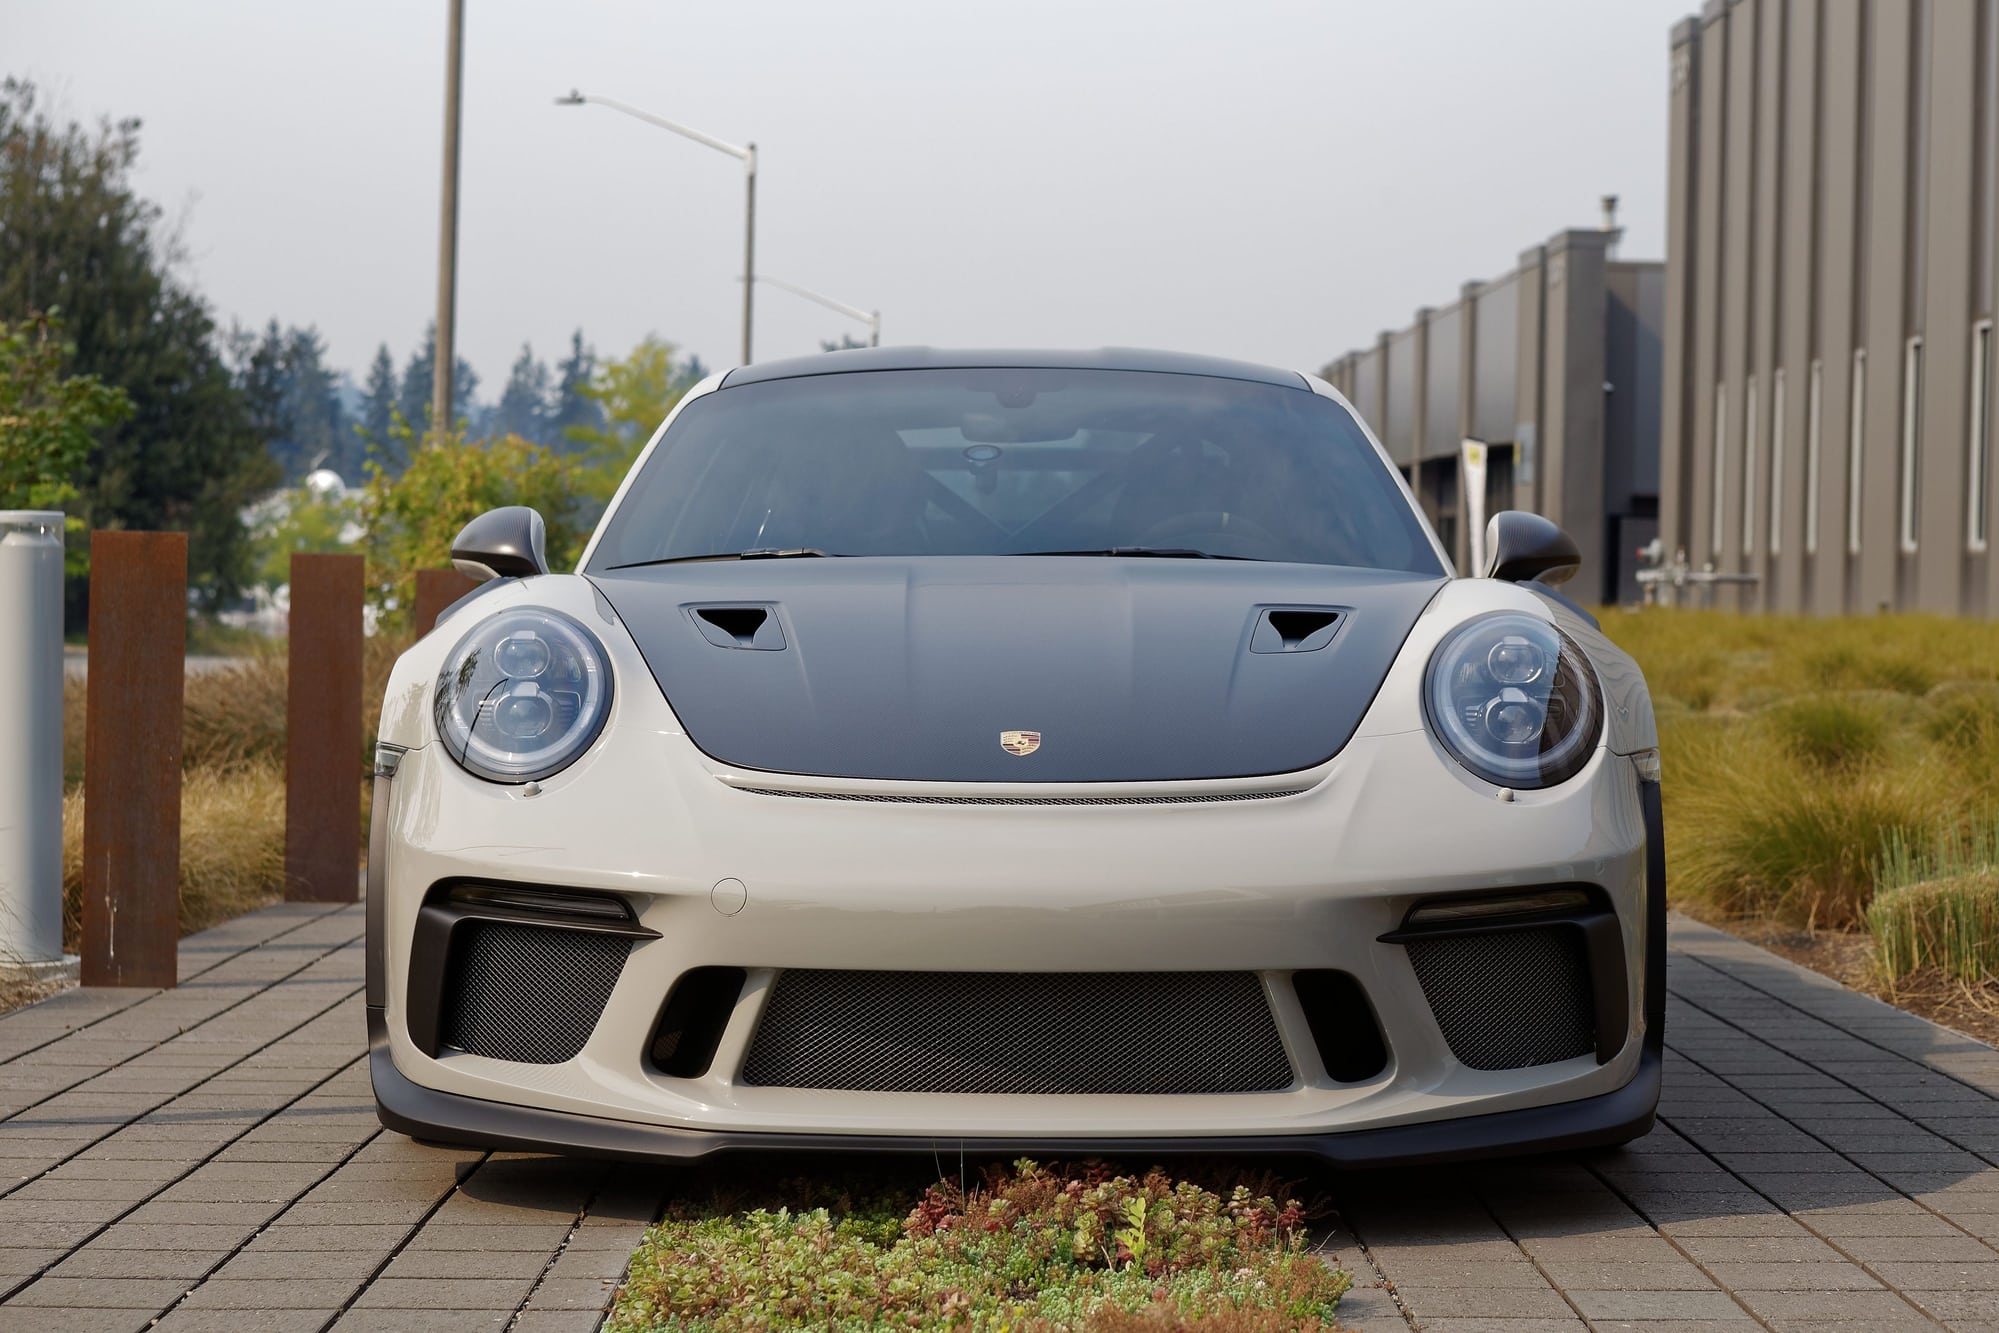 2019 Porsche GT3 - Perfect Spec 2019 GT3RS Chalk, Magnesium Wheels, Weissach - Used - VIN wp0af2a92ks165907 - 2,400 Miles - 6 cyl - 2WD - Automatic - Coupe - Other - Redmond, WA 98052, United States